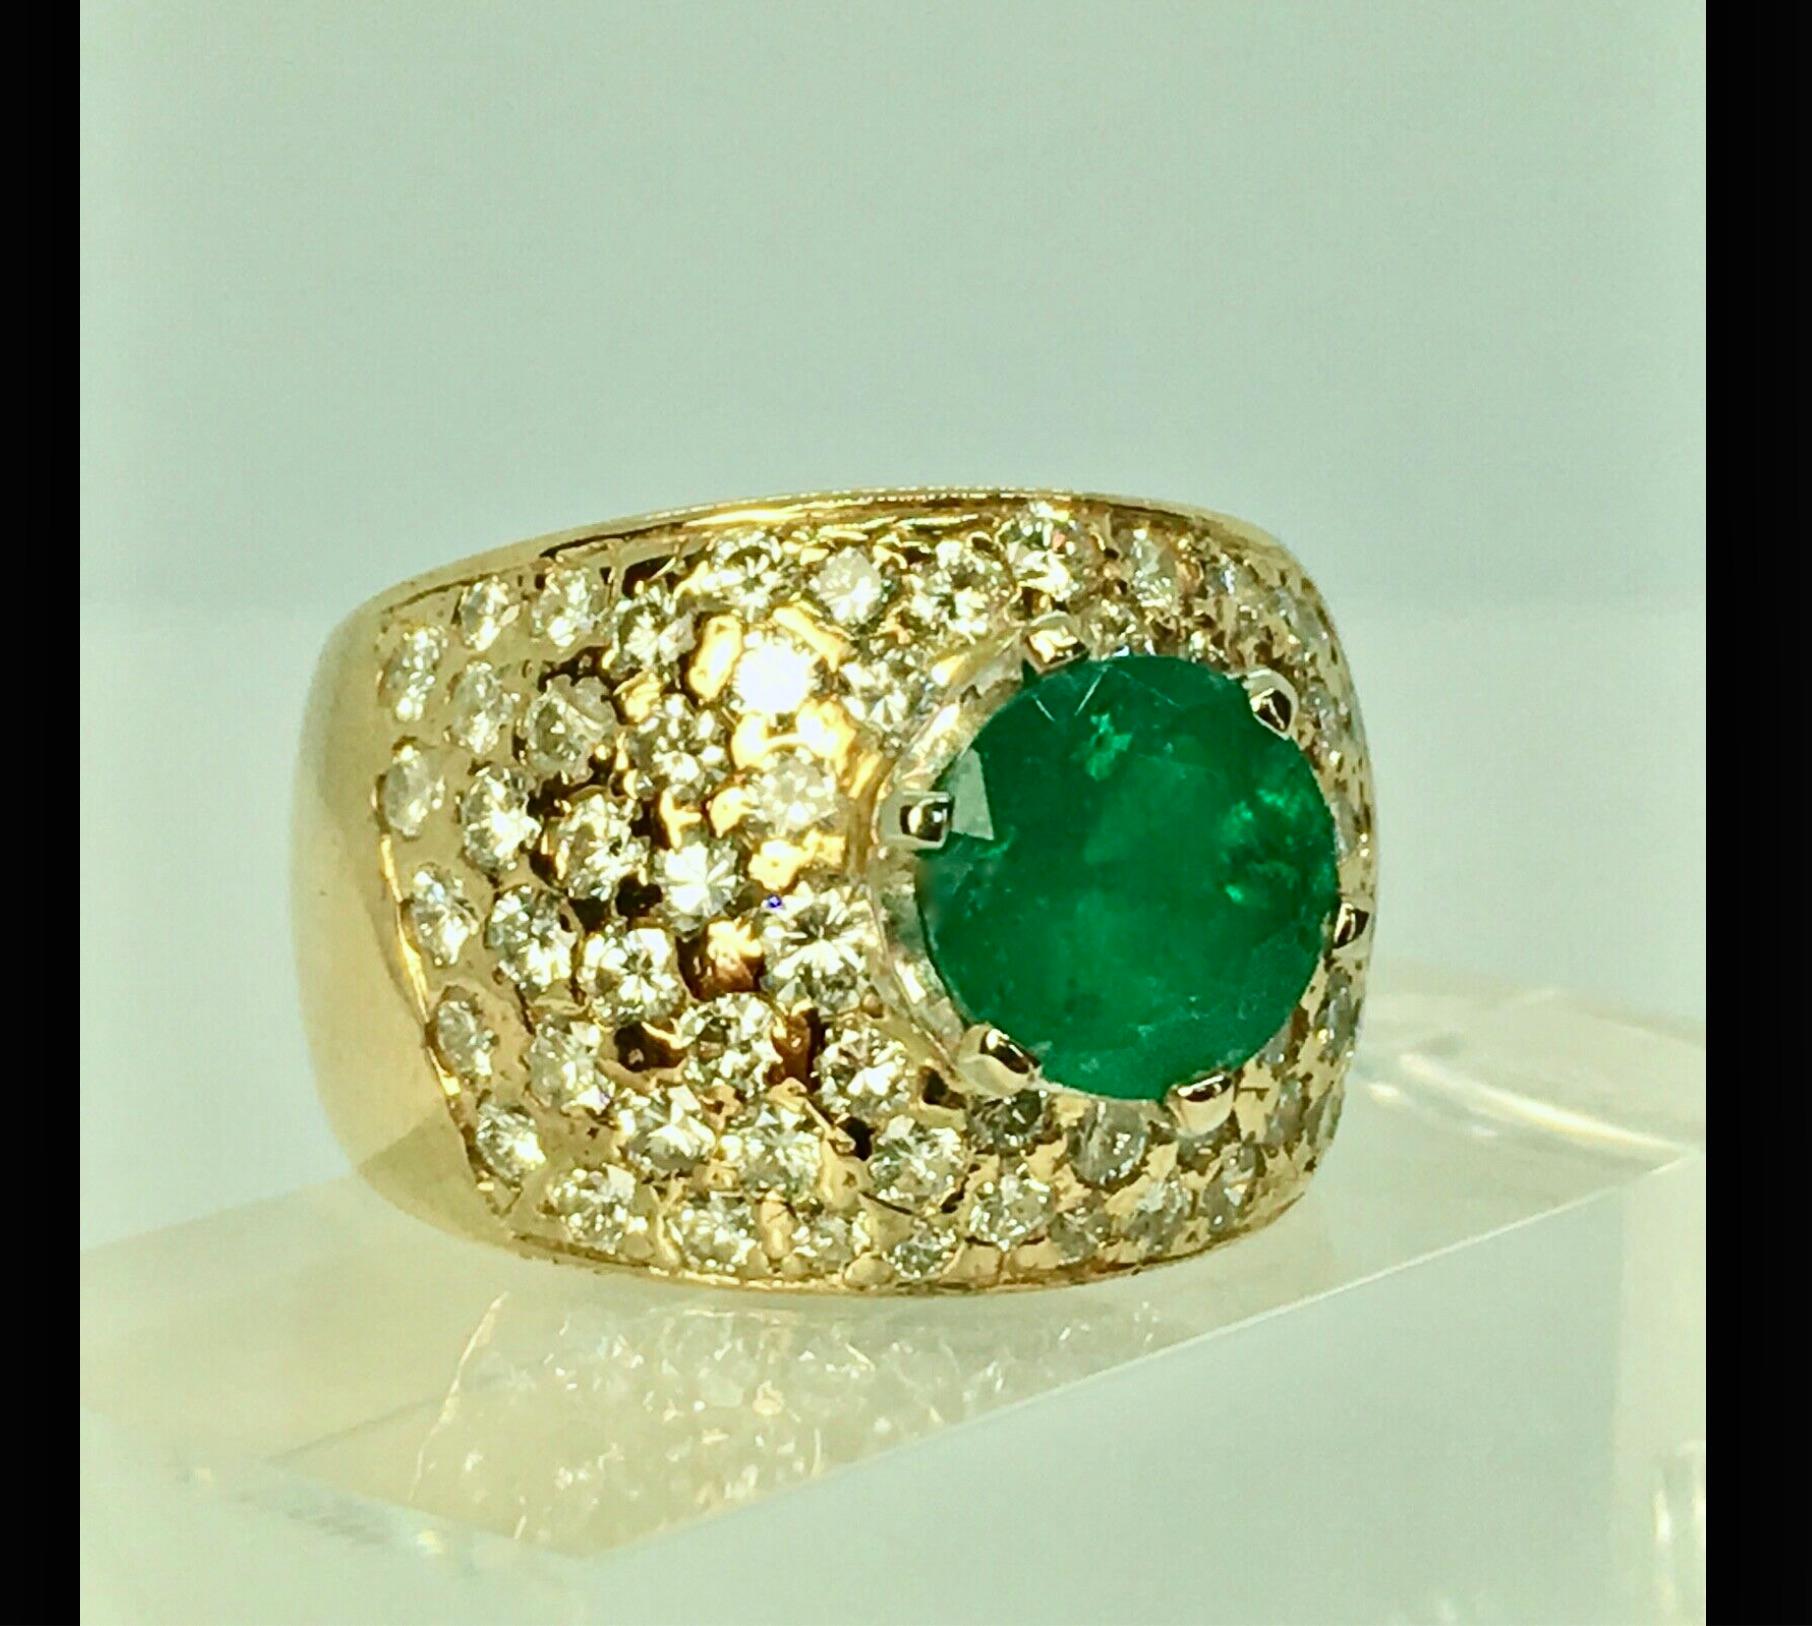 GORGEOUS VINTAGE INTENSE GREEN COLOMBIAN NATURAL EMERALD AND DIAMOND RING 14K
Featuring an 2.10 carat rich green round cut emerald. The center Colombian emerald is set in six prongs surrounded by a diamond  Pave' set round brilliant diamonds. The